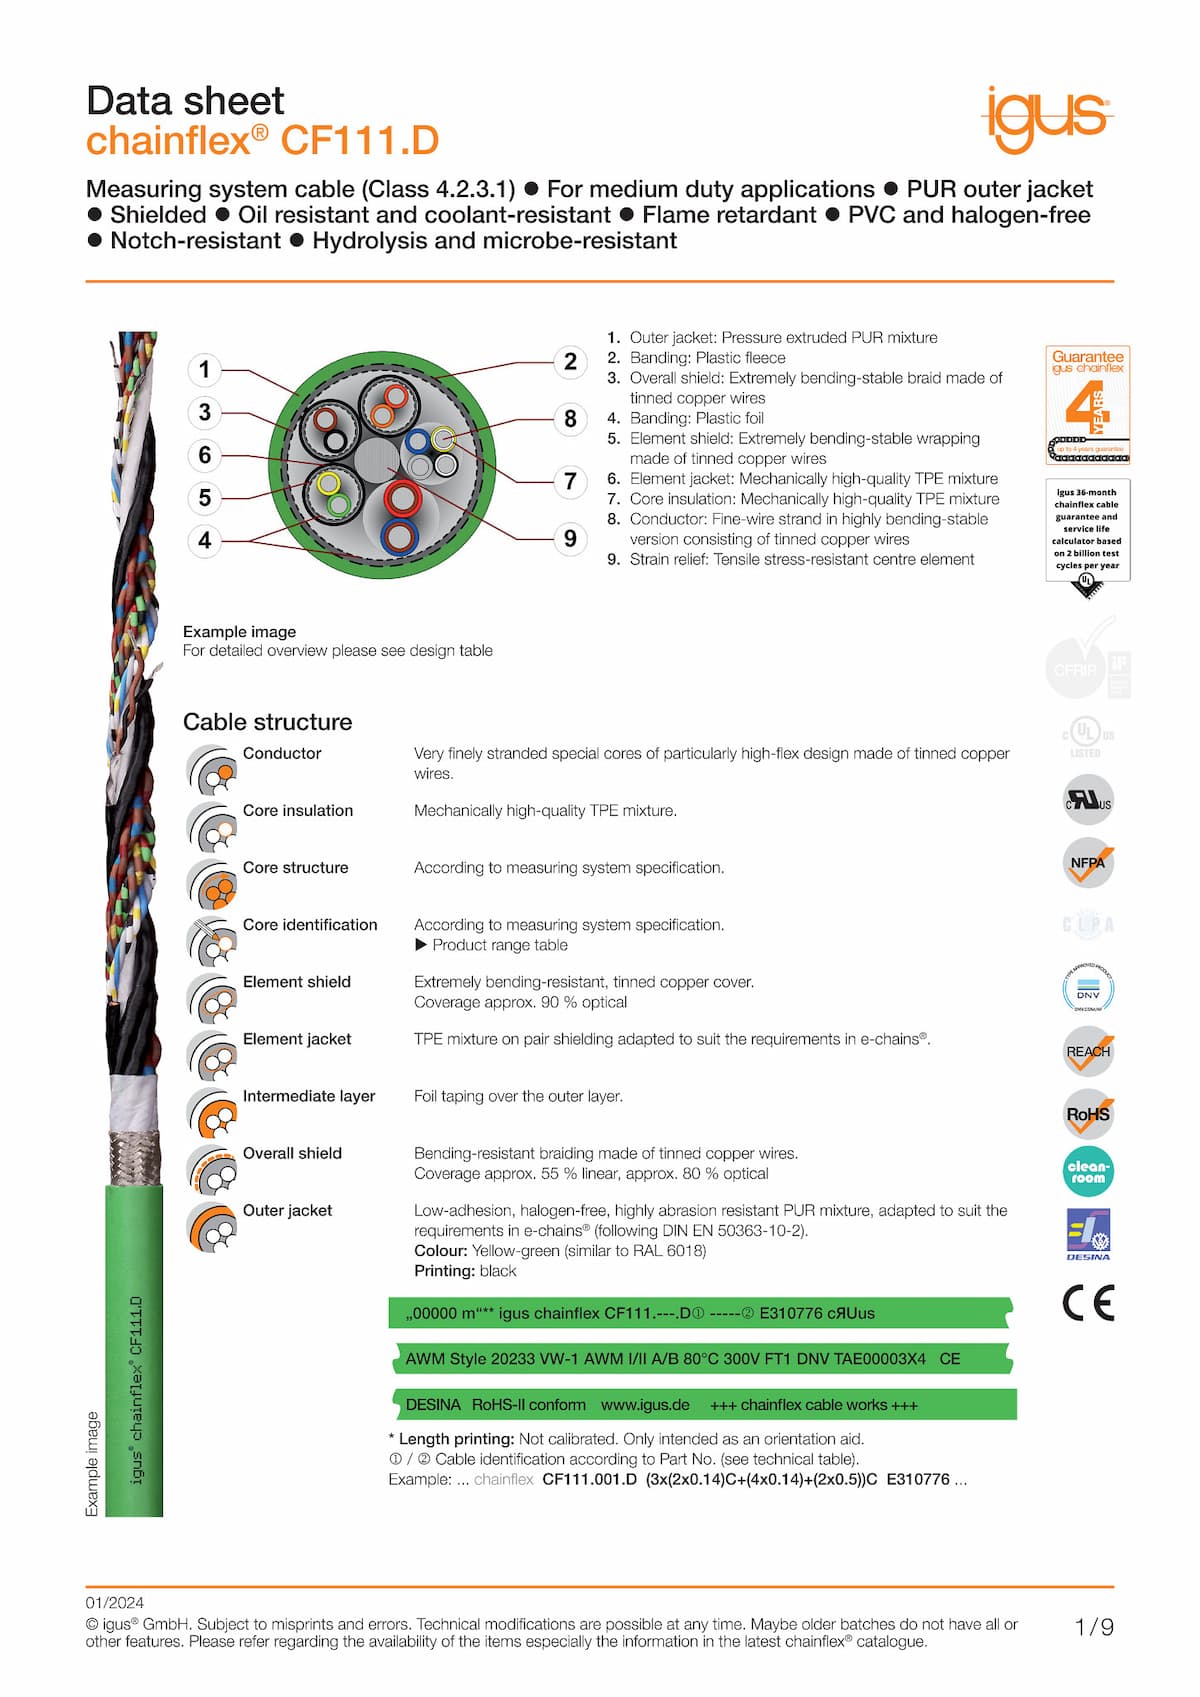 Technical data sheet chainflex® measuring system cable CF111.D